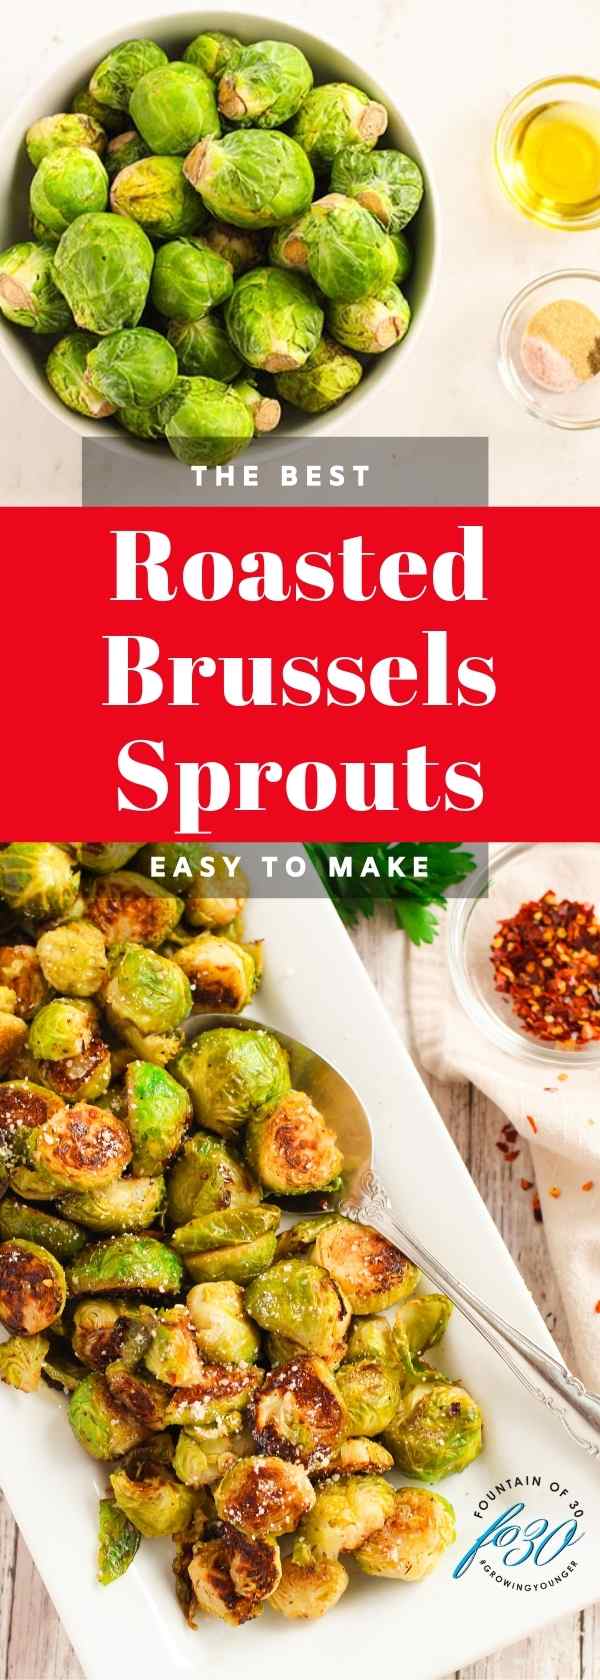 the best Brussels sprouts recipe fountainof30